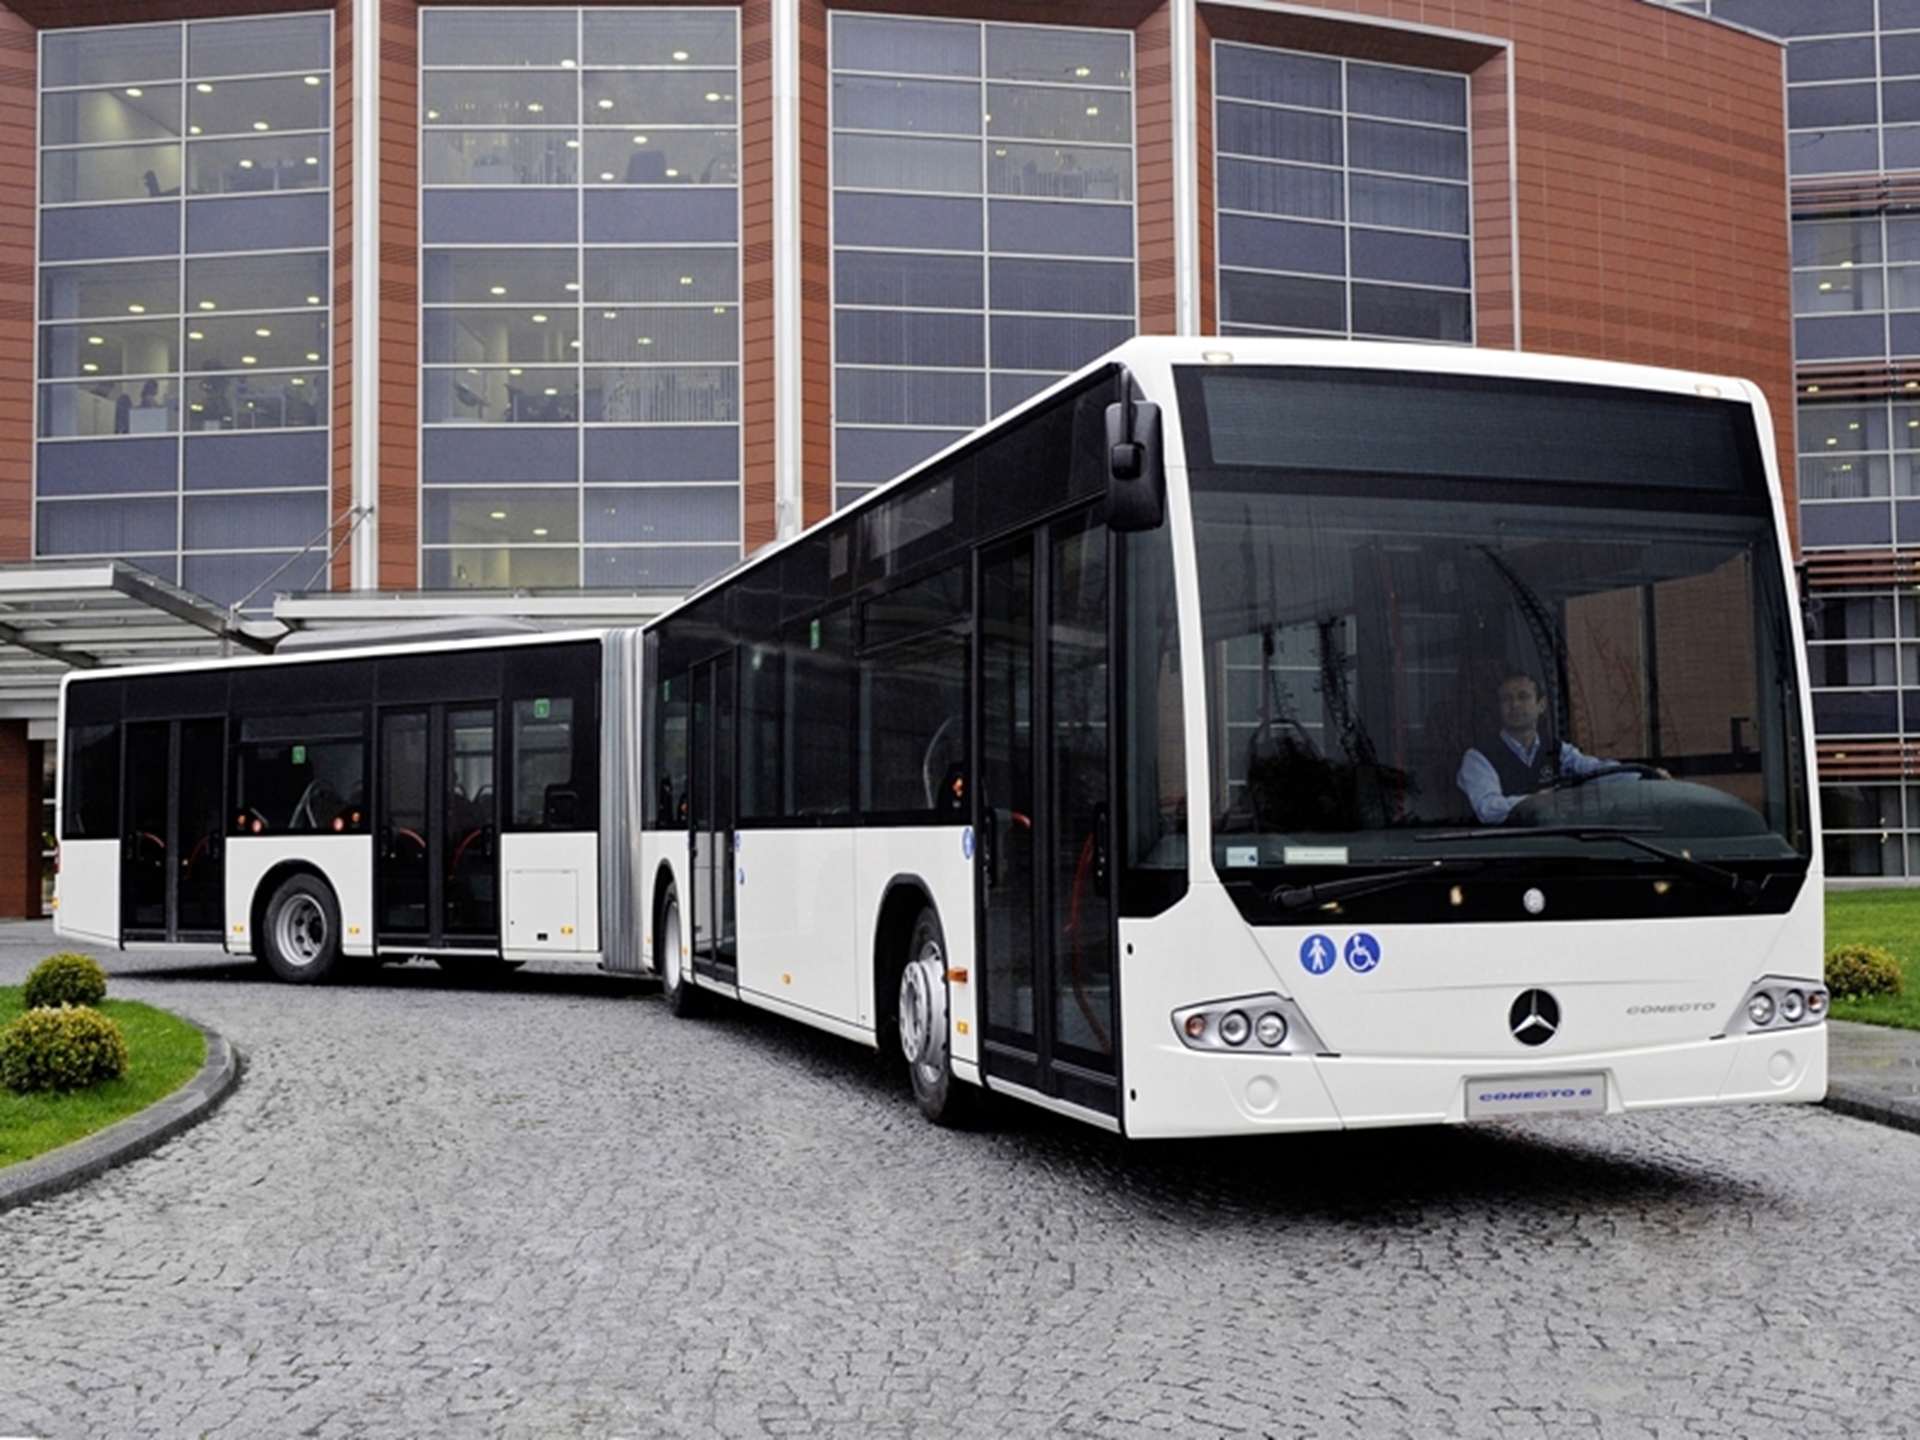 Public transport in Istanbul shifts into a higher gear with a major order for 221 Mercedes-Benz city buses